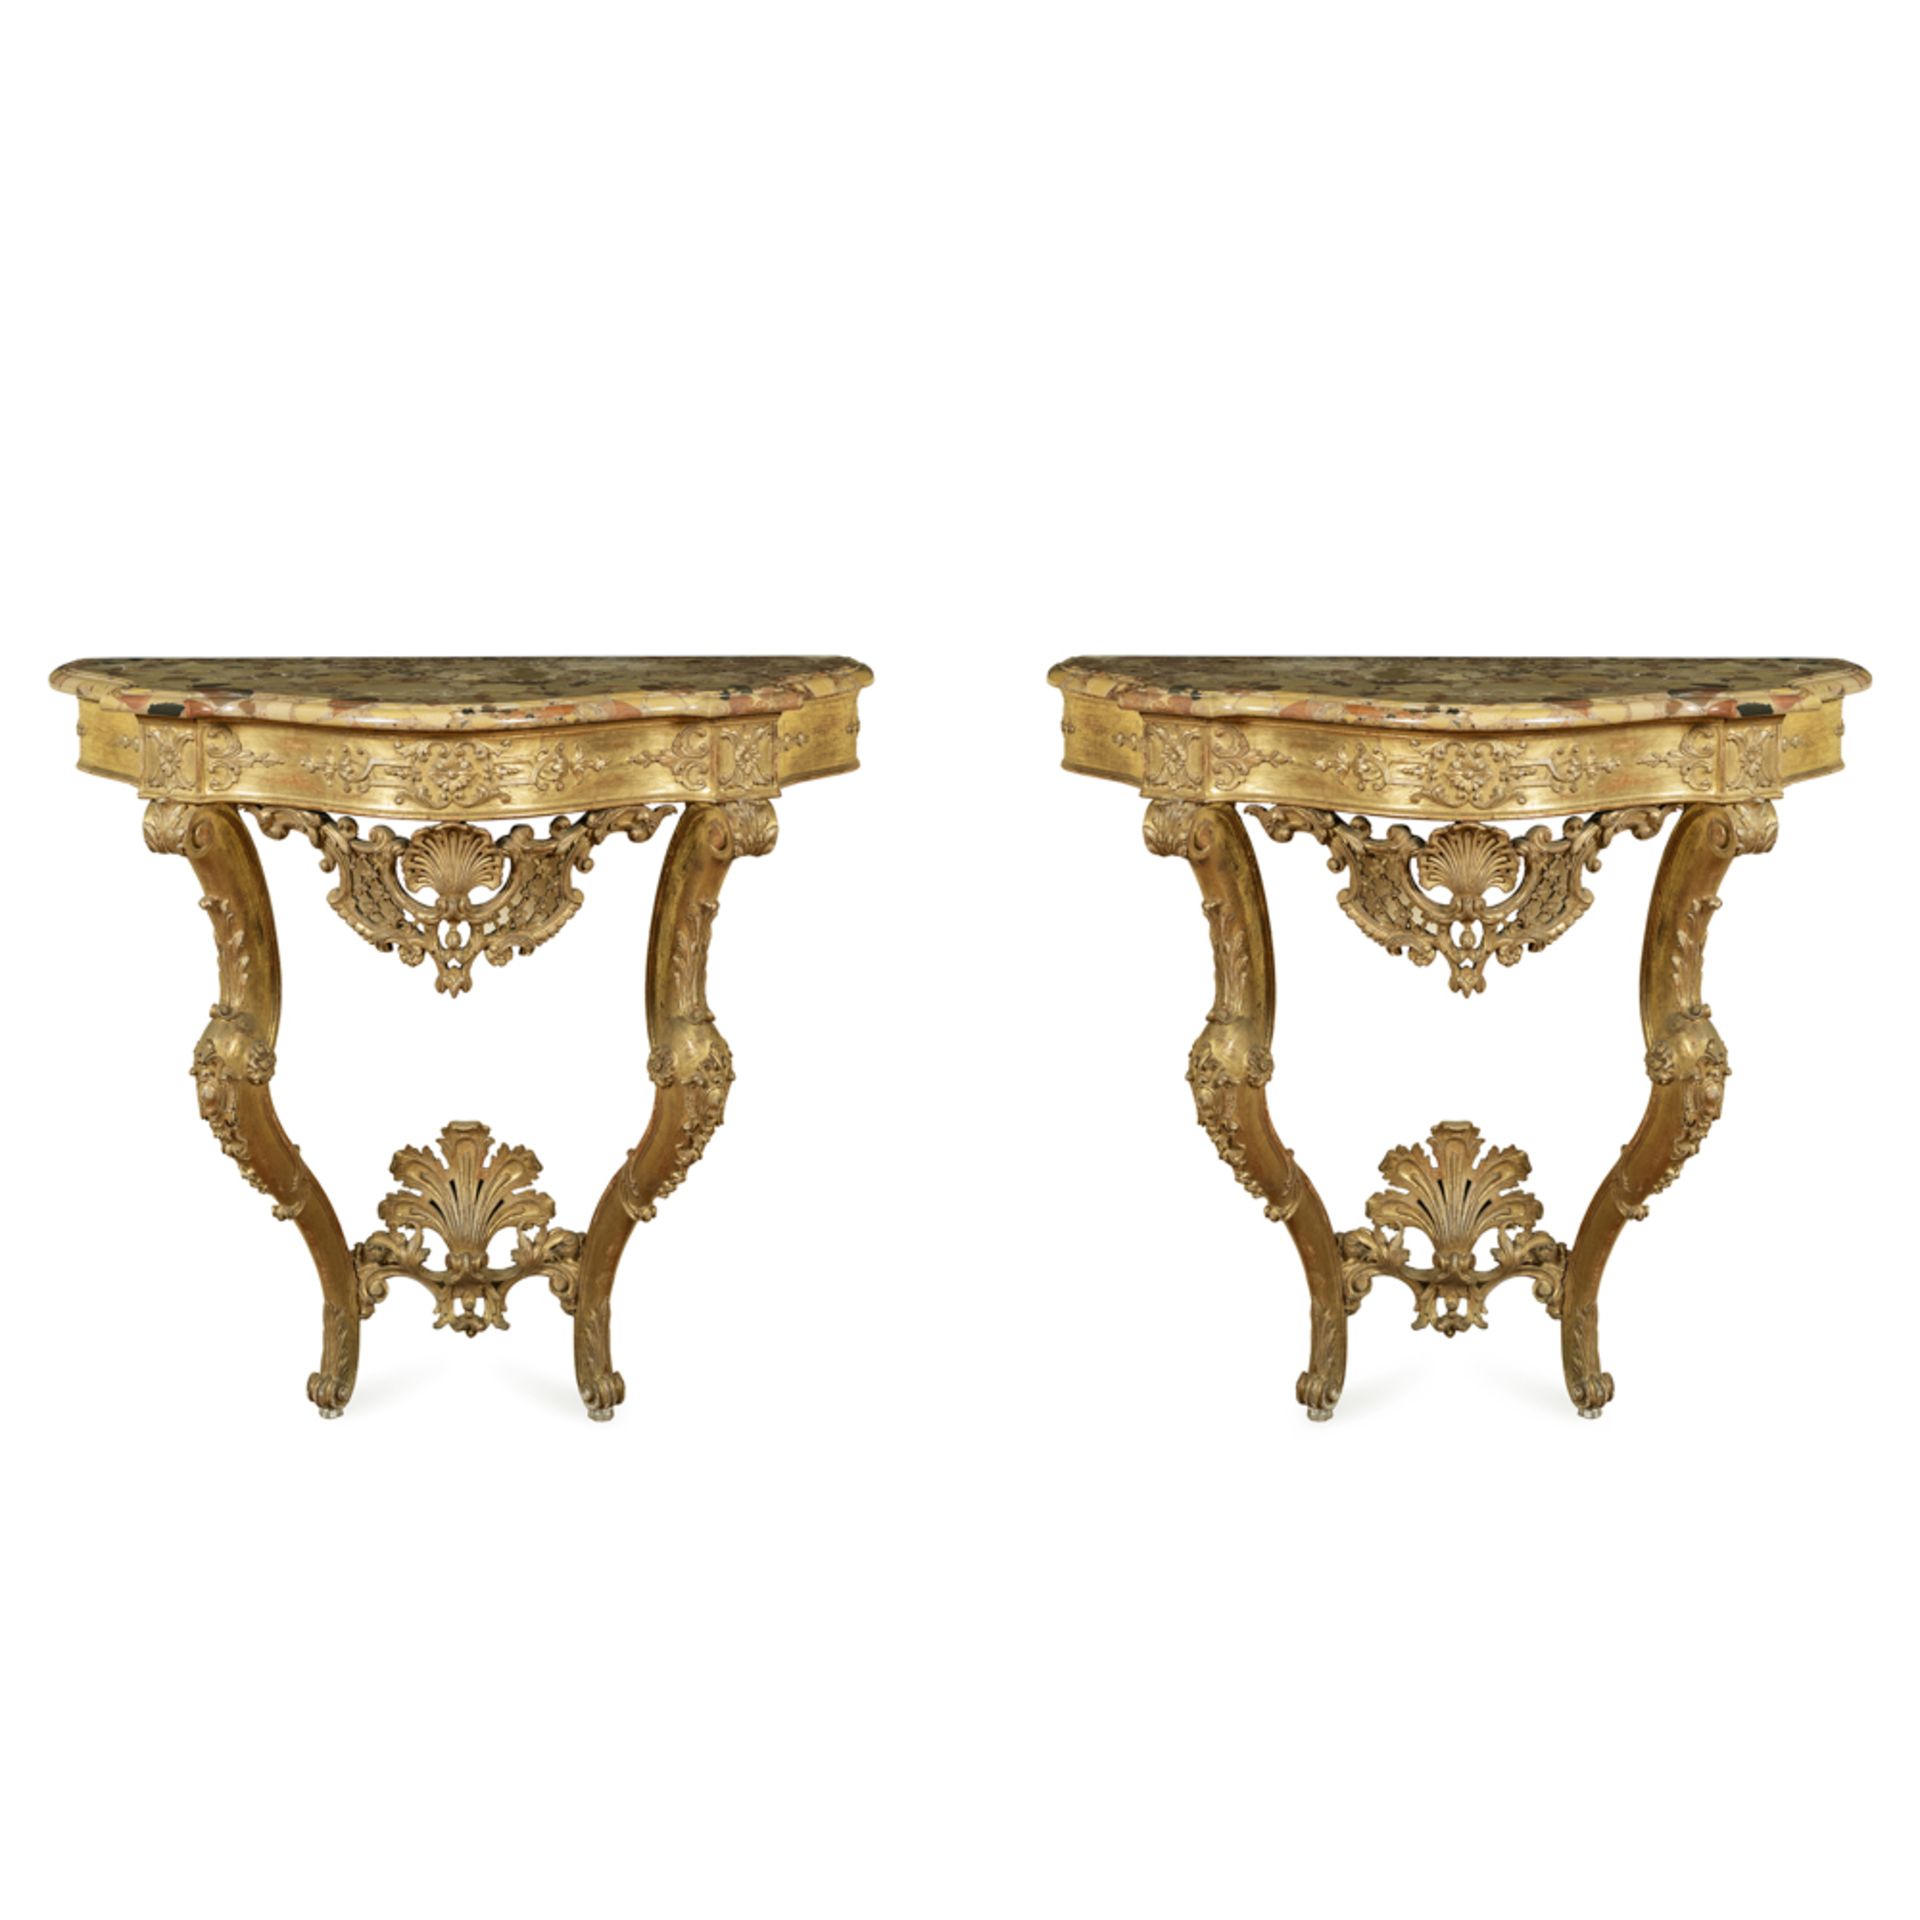 Pair of gilded wood consoles